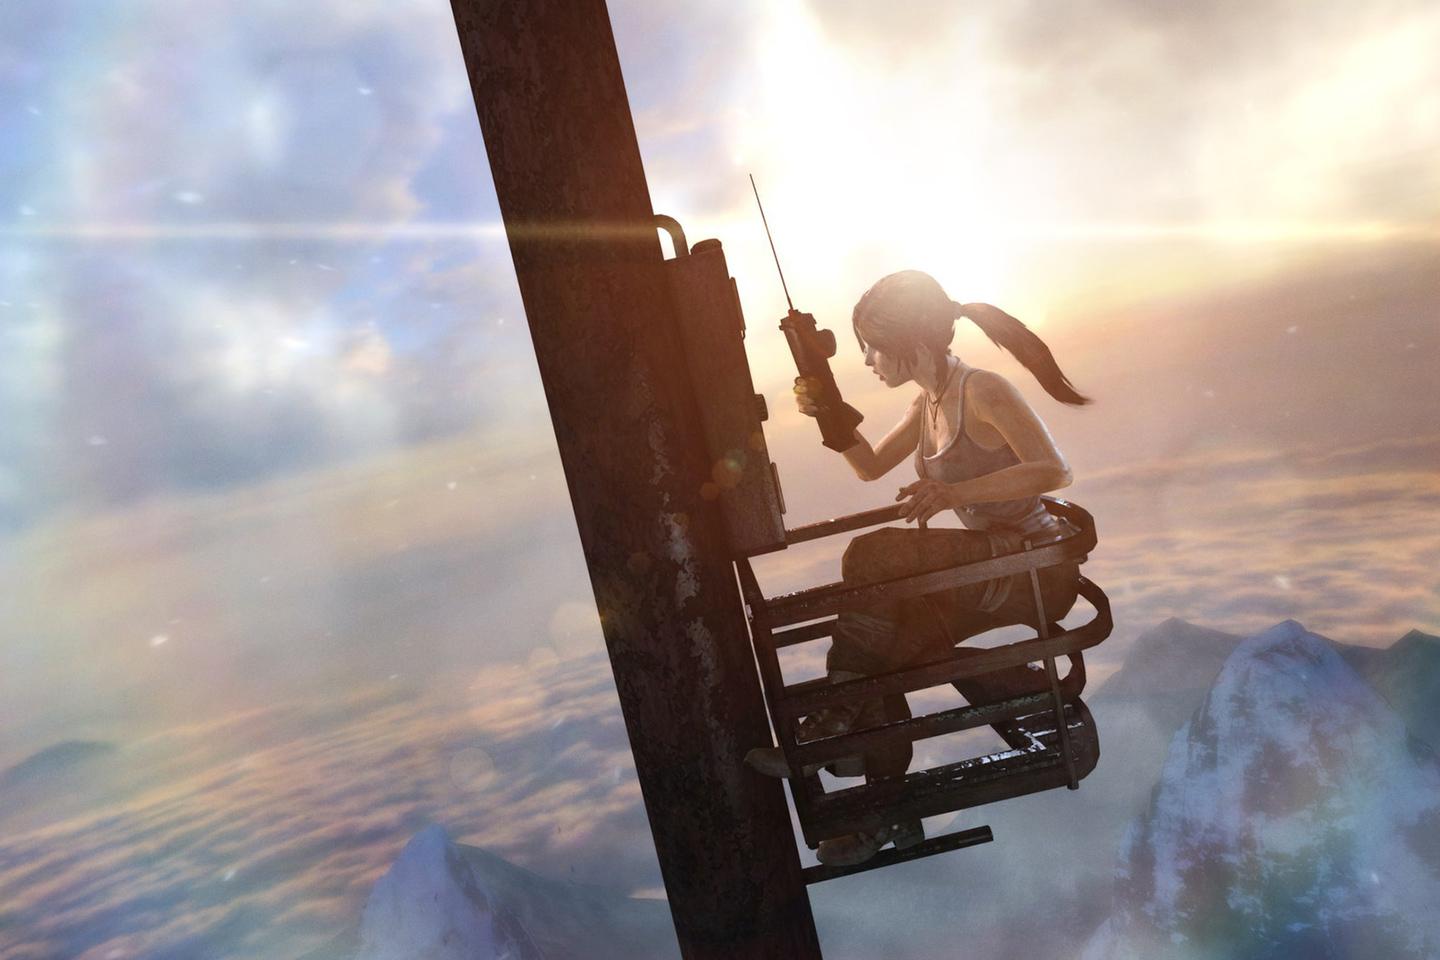 Lara holding a large phone sitting on metal contraption attached to pole high above snowy mountaintops. 